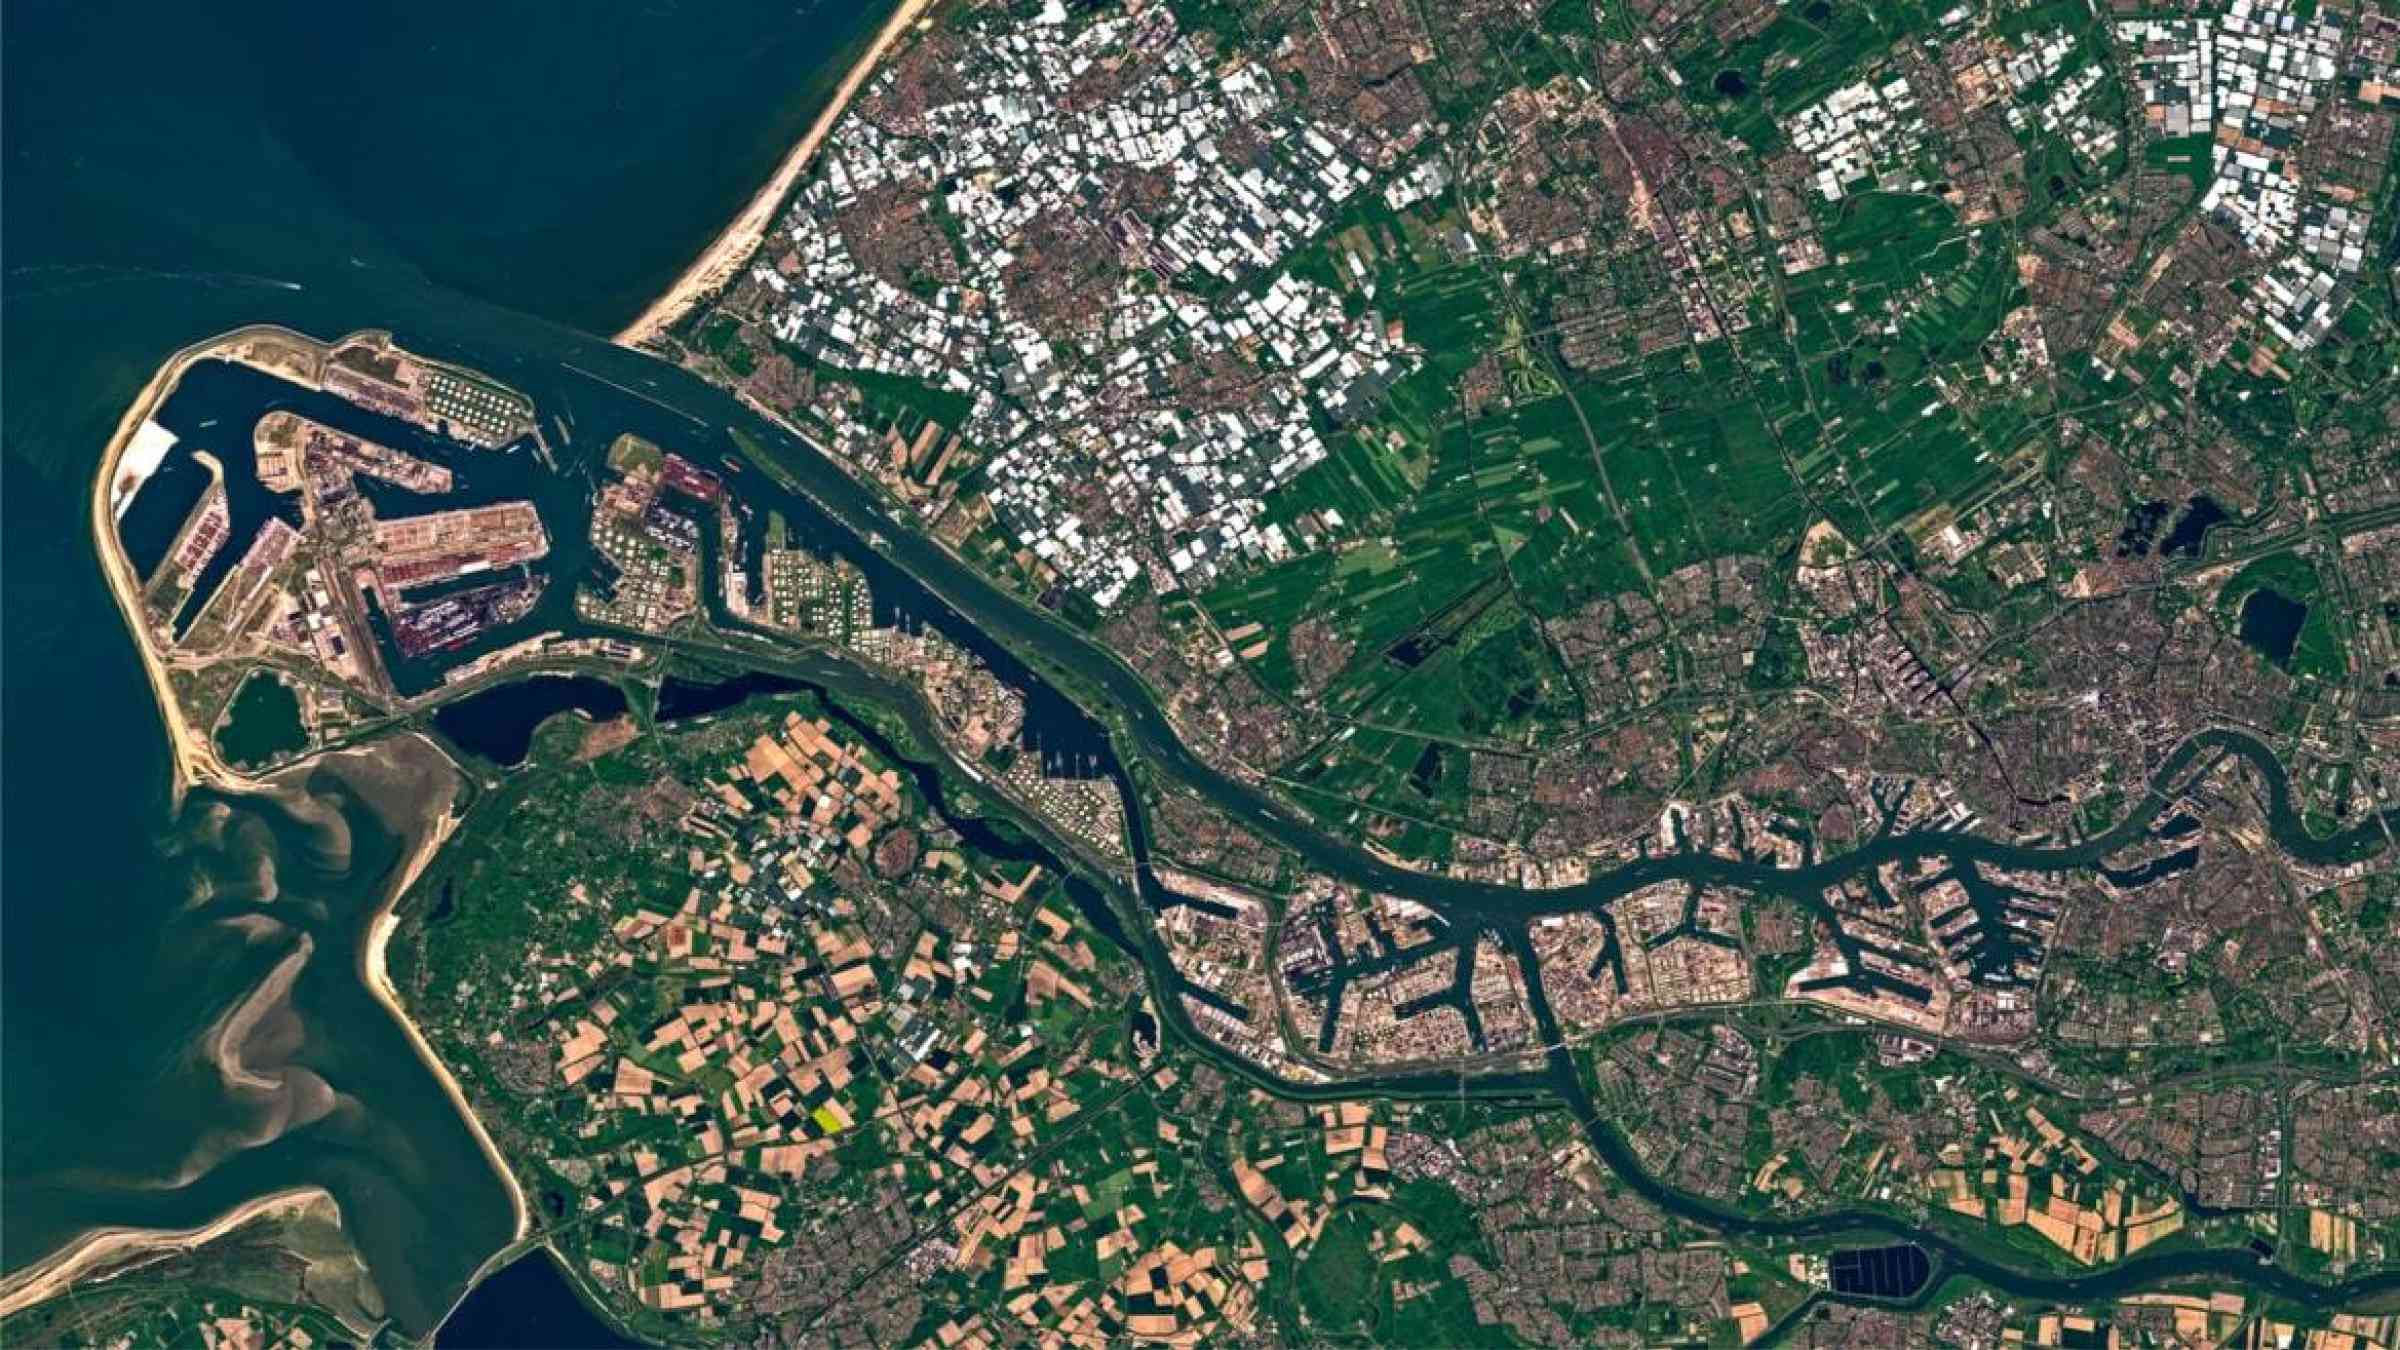 An aerial view of Rotterdam and the Europoort harbor